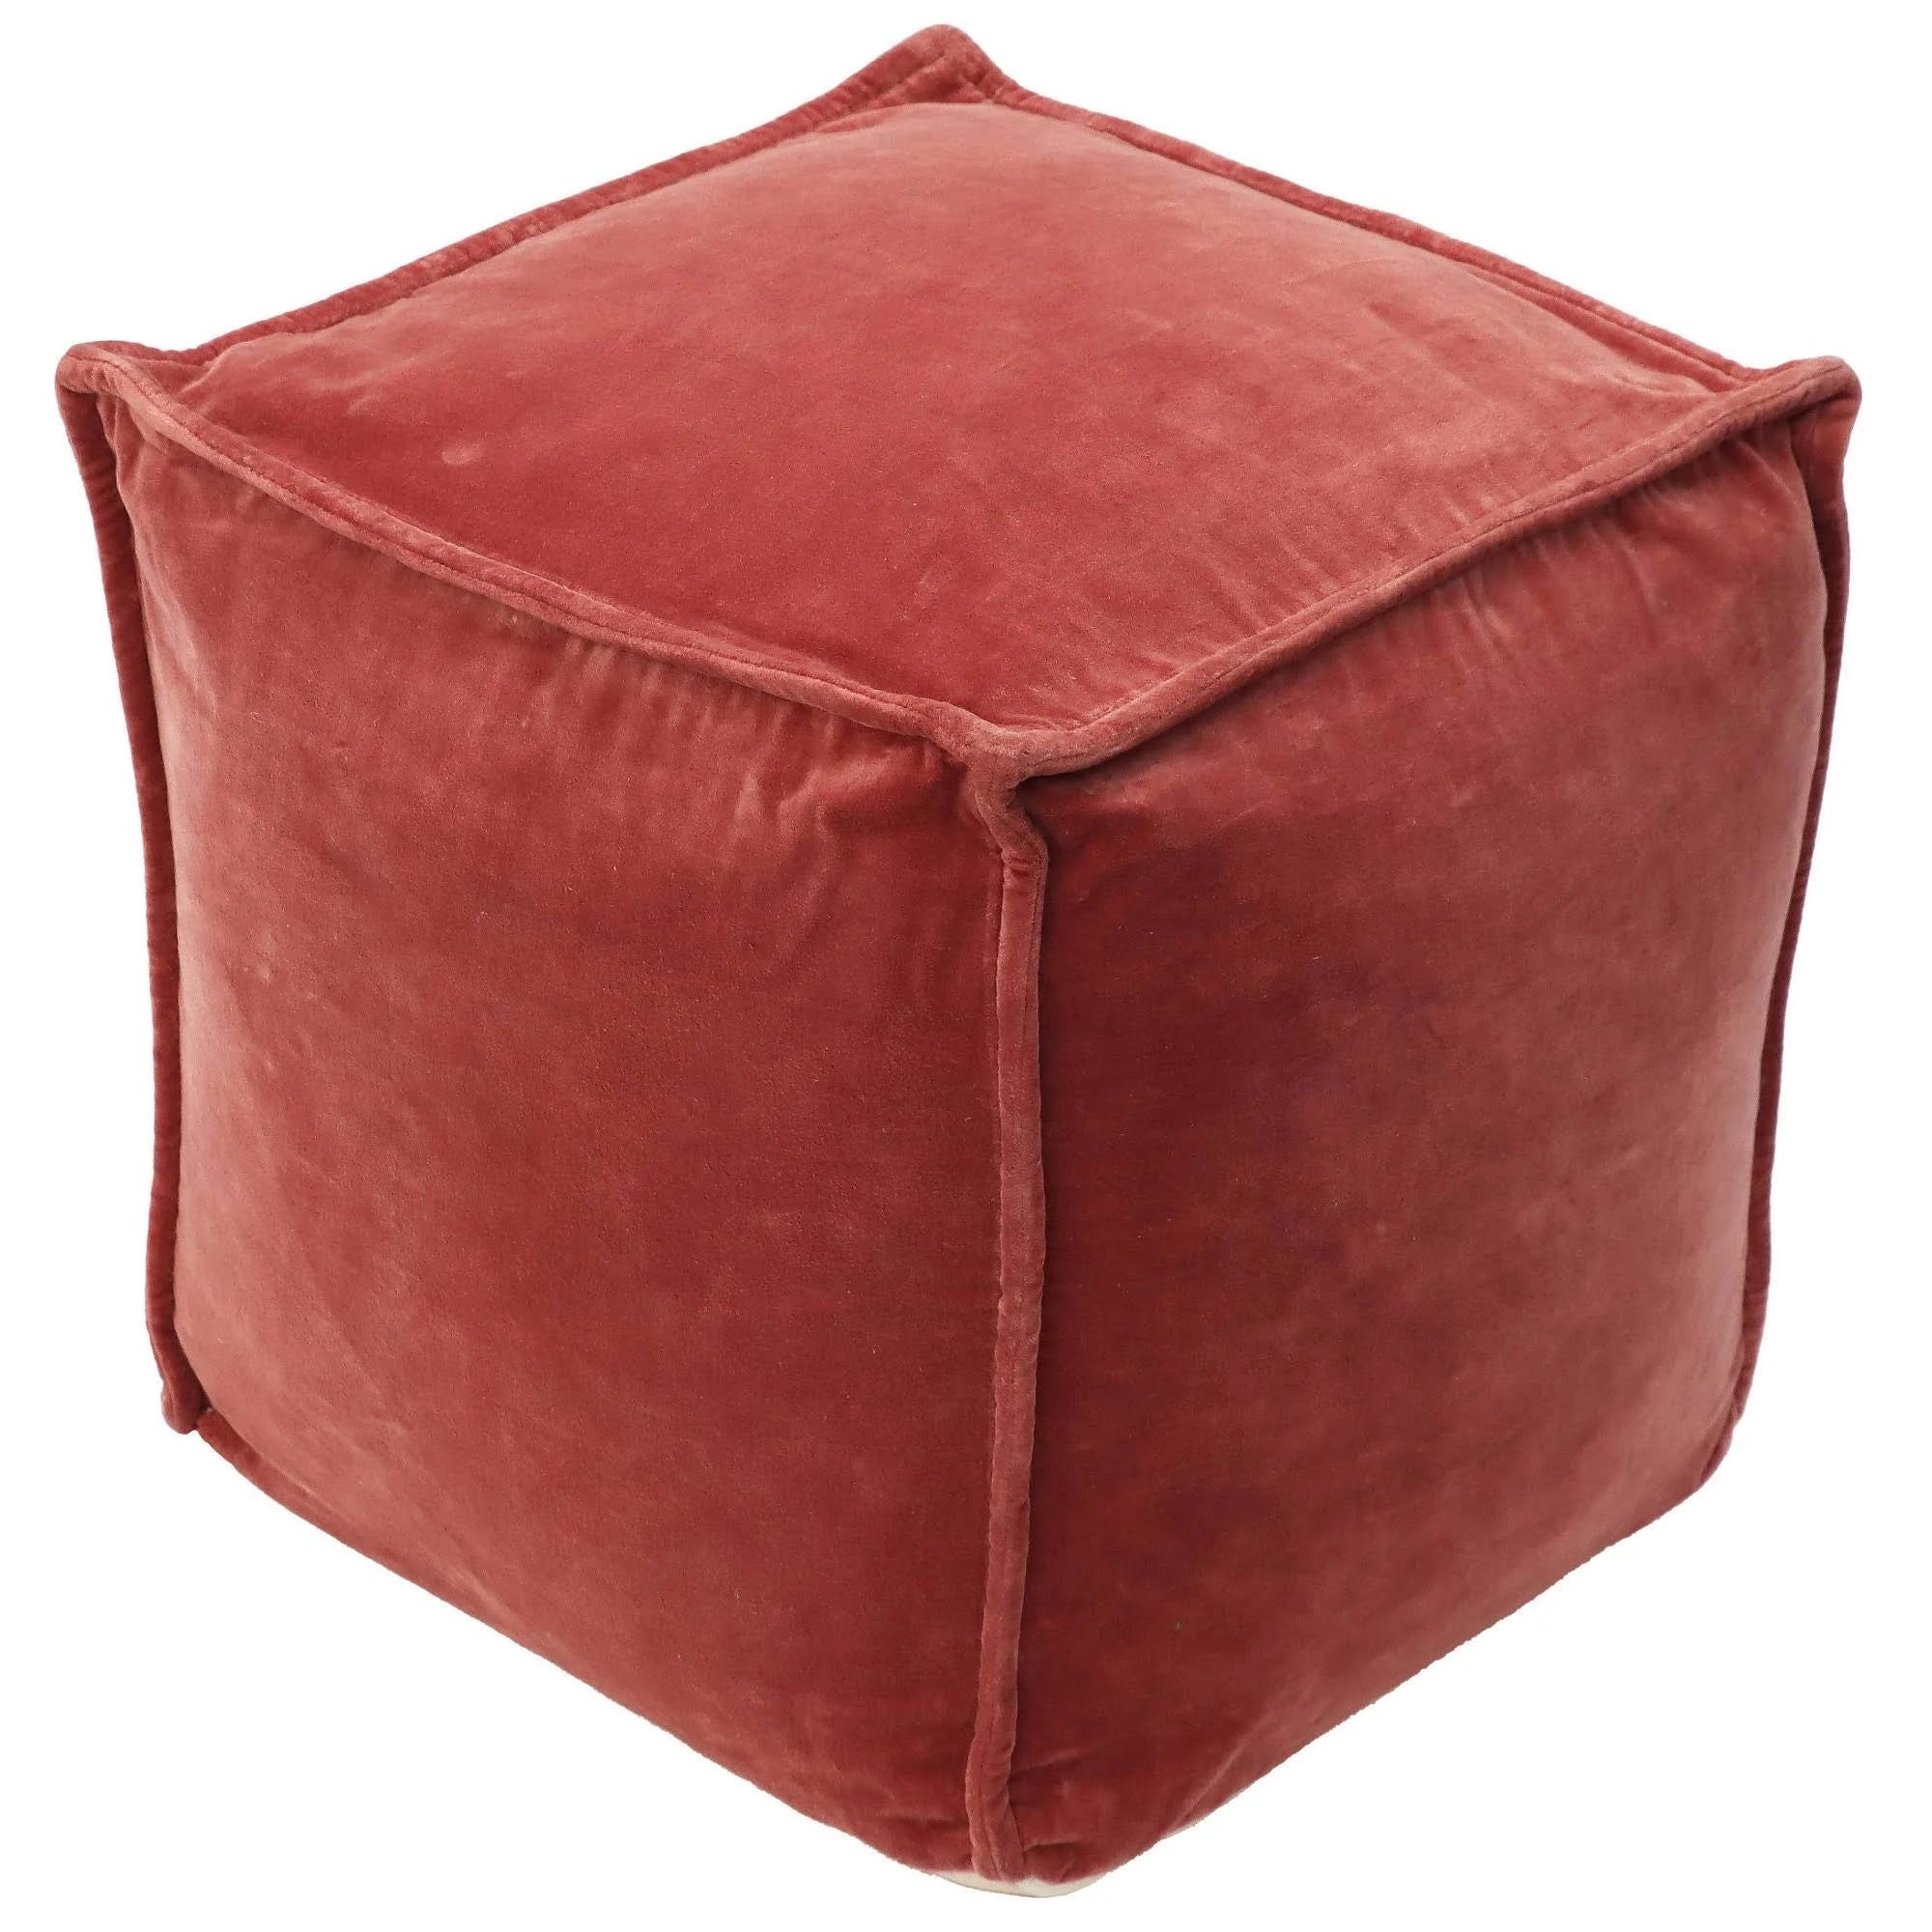 Threshold Costa Velvet Pouf - Perfect Accent Seating | Image